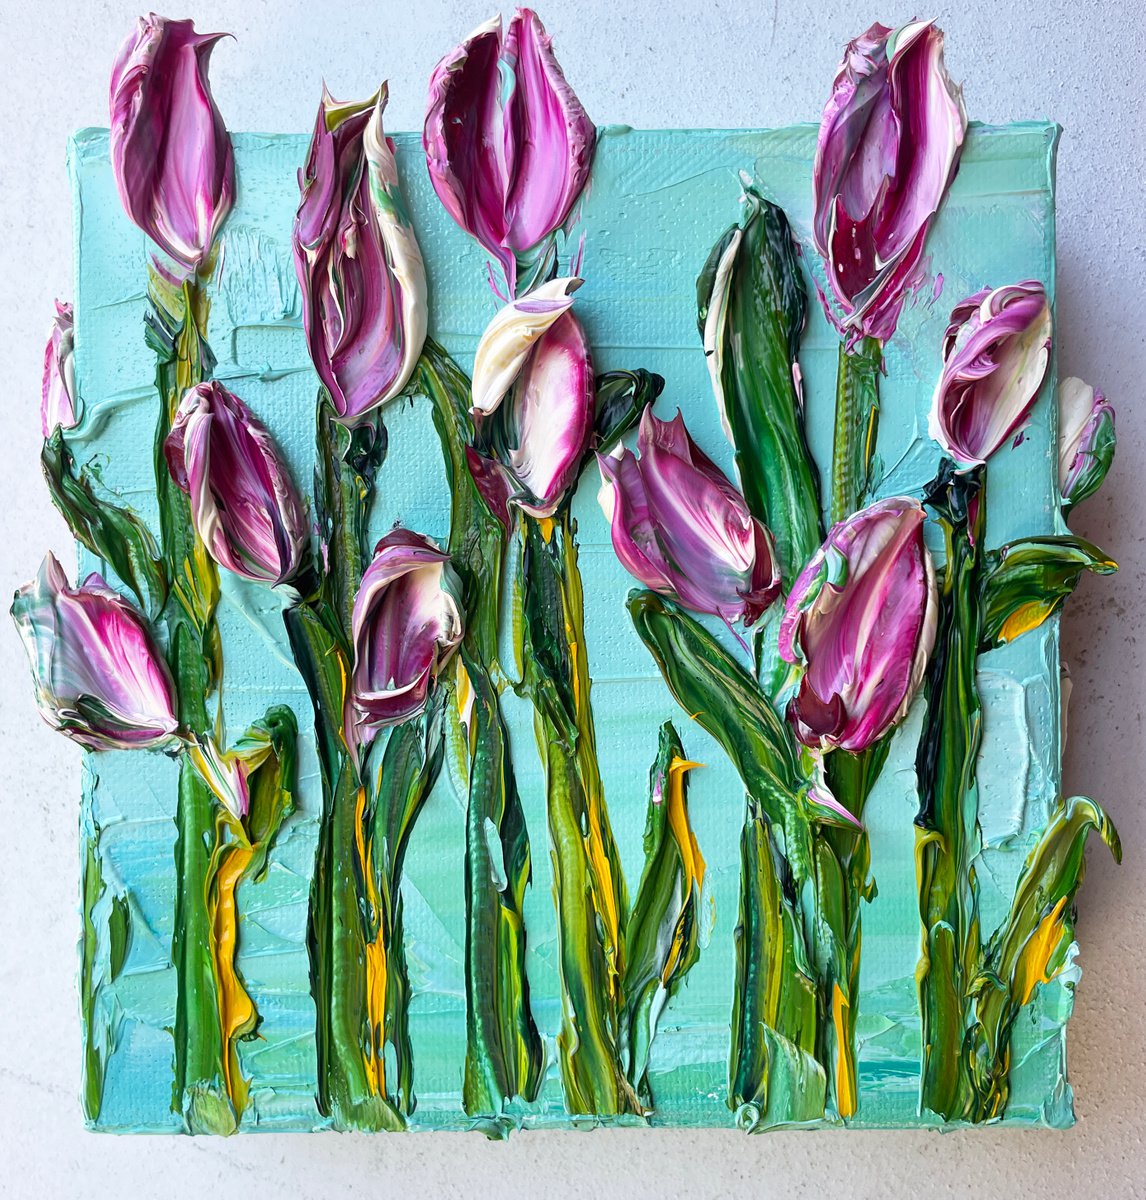 Tulips in the Springtime by Lisa Elley